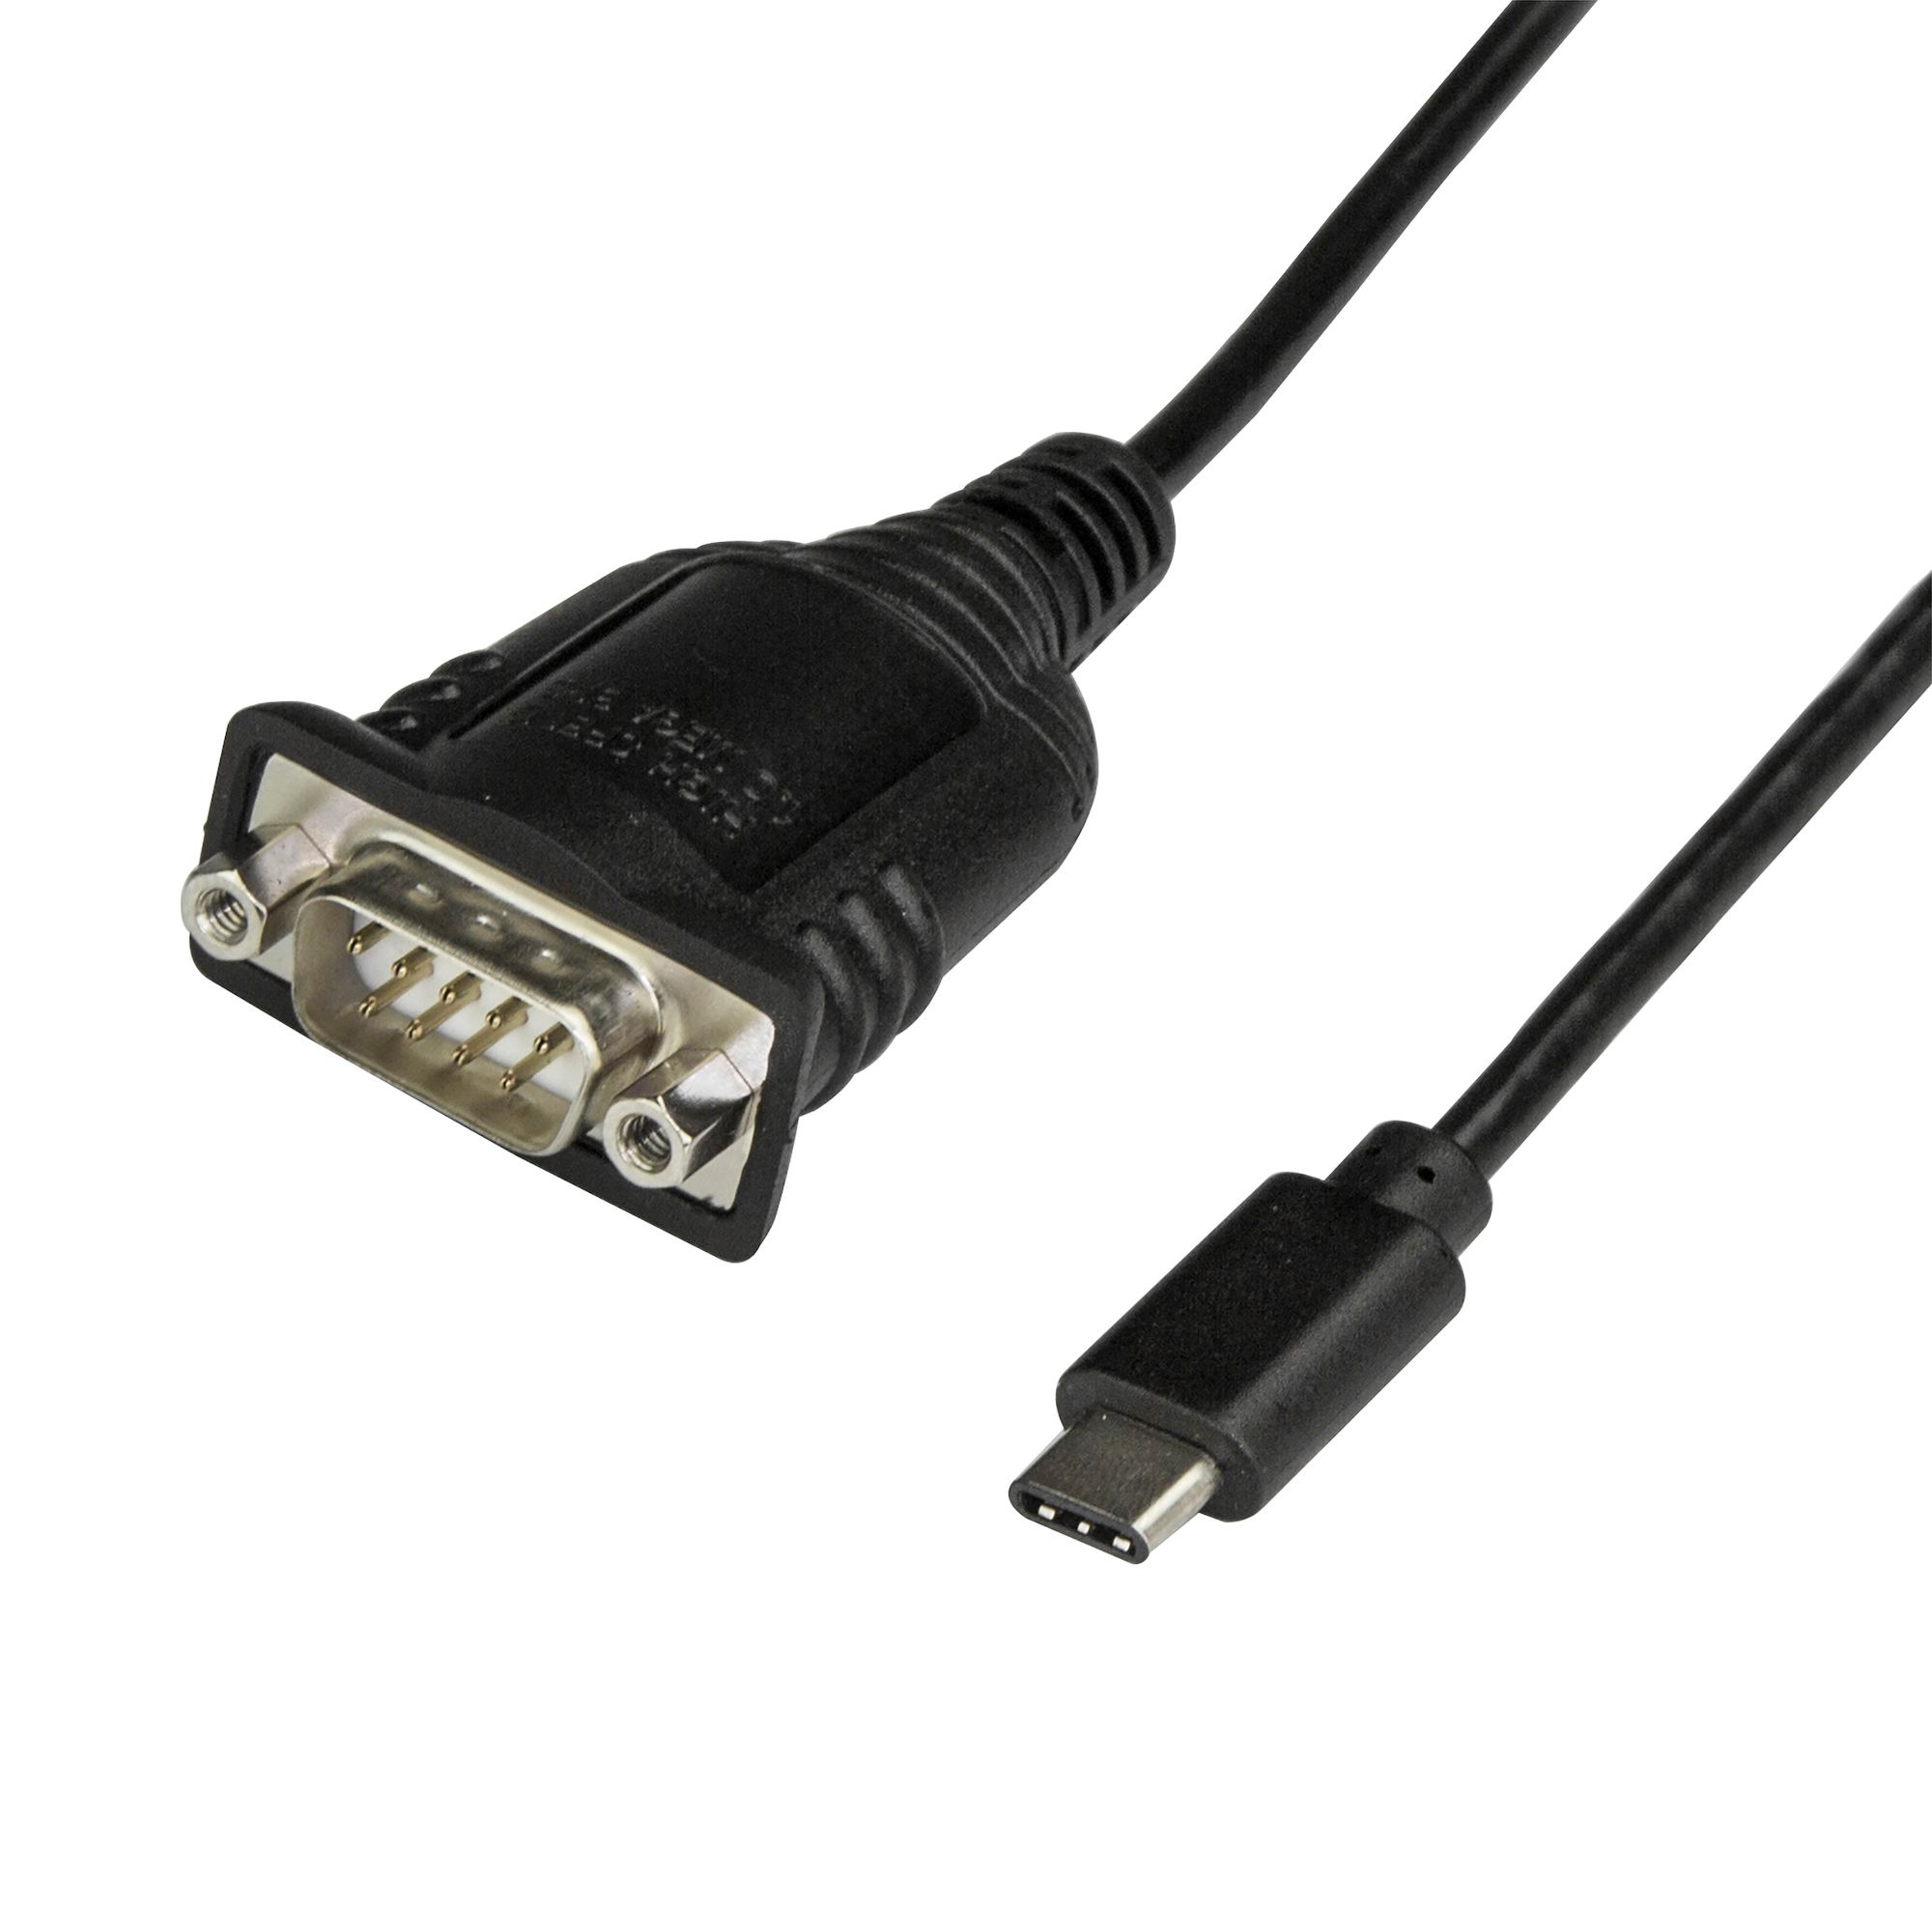 Vernederen Defilé Assimileren StarTech.com USB C to Serial Adapter Cable 16" (40cm) - USB Type-C to Serial  RS232 (DB9) Cable Converter - Male/Male - Windows/Mac/Linux - Portable USB  Type-C to male serial RS232 DB9 adapter